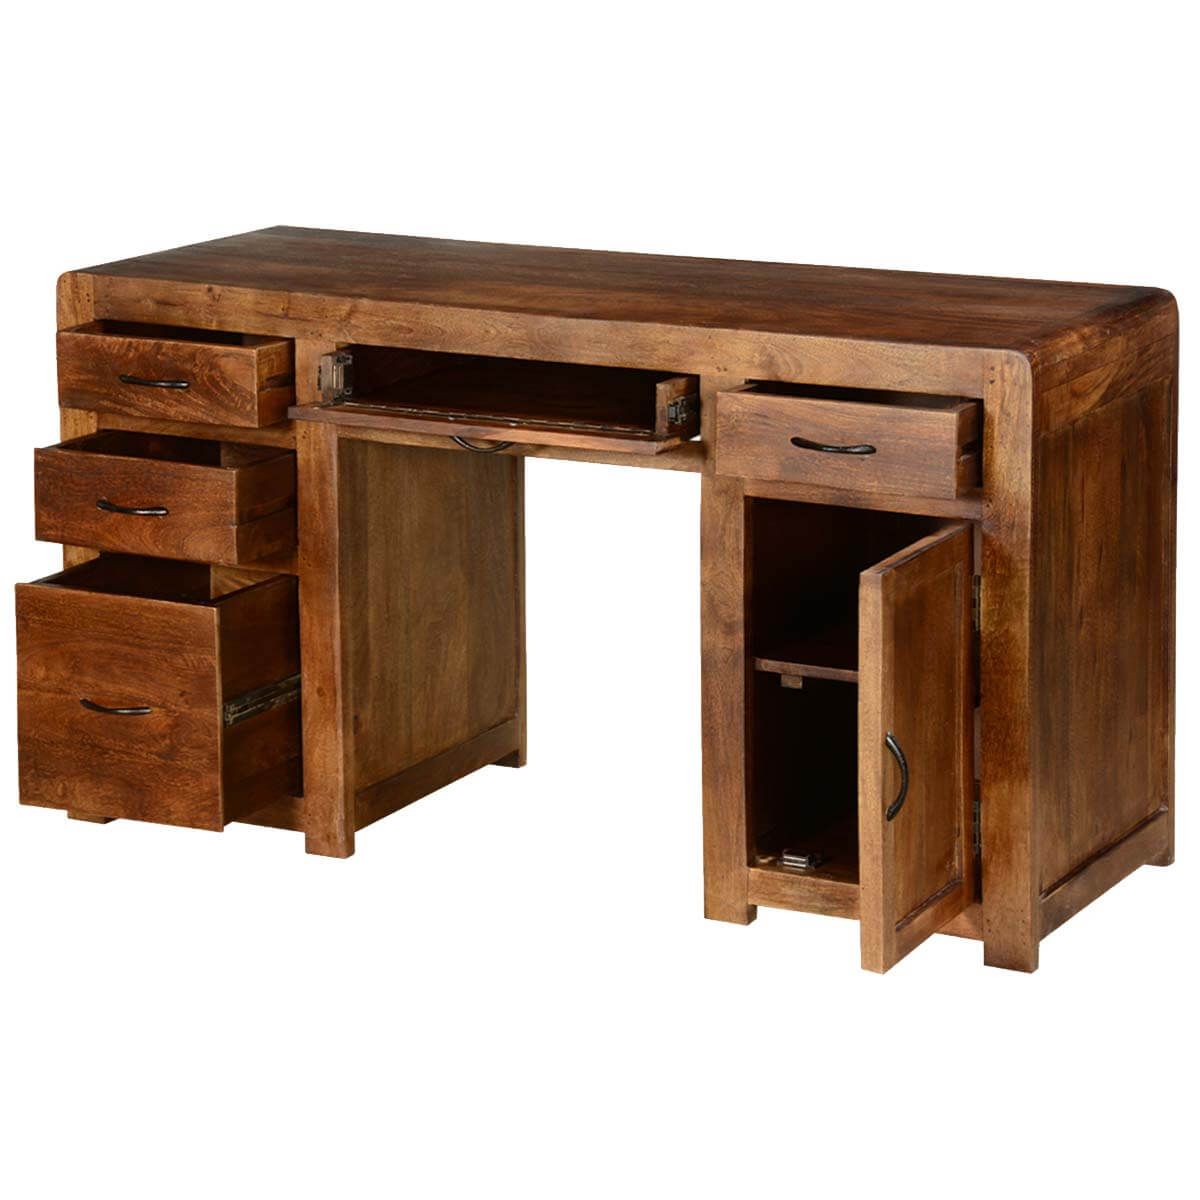 Rustic Solid Mango Wood Desks With File Cabinets For Wood Center Drawer Computer Desks (View 12 of 15)